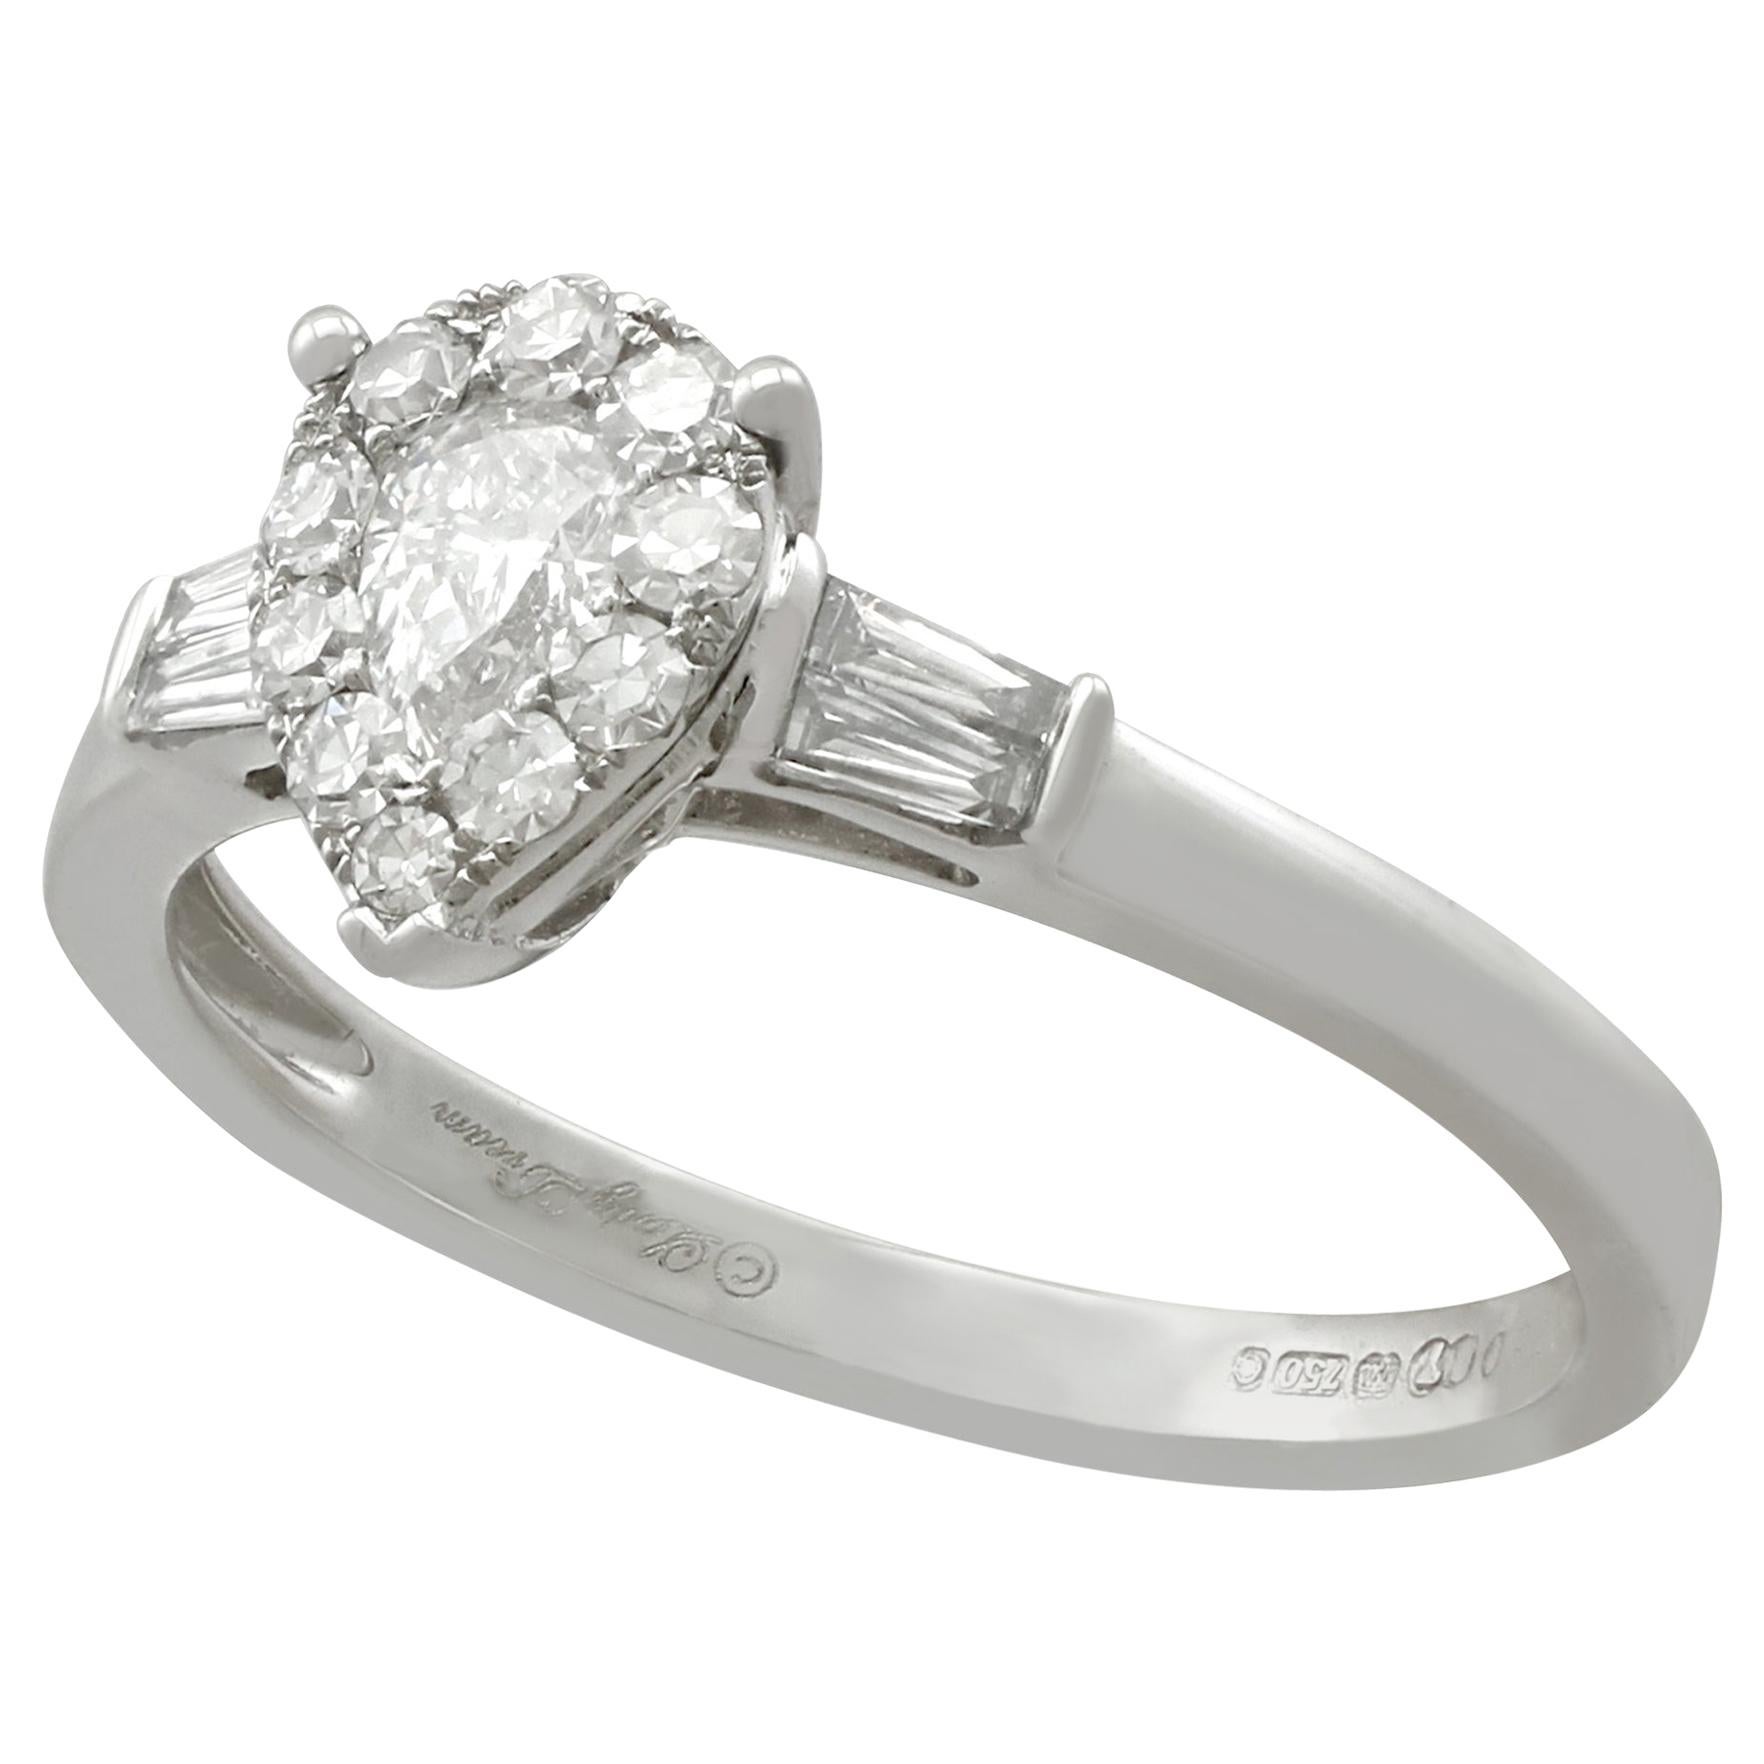 Diamond White Gold Solitaire Ring with Accents